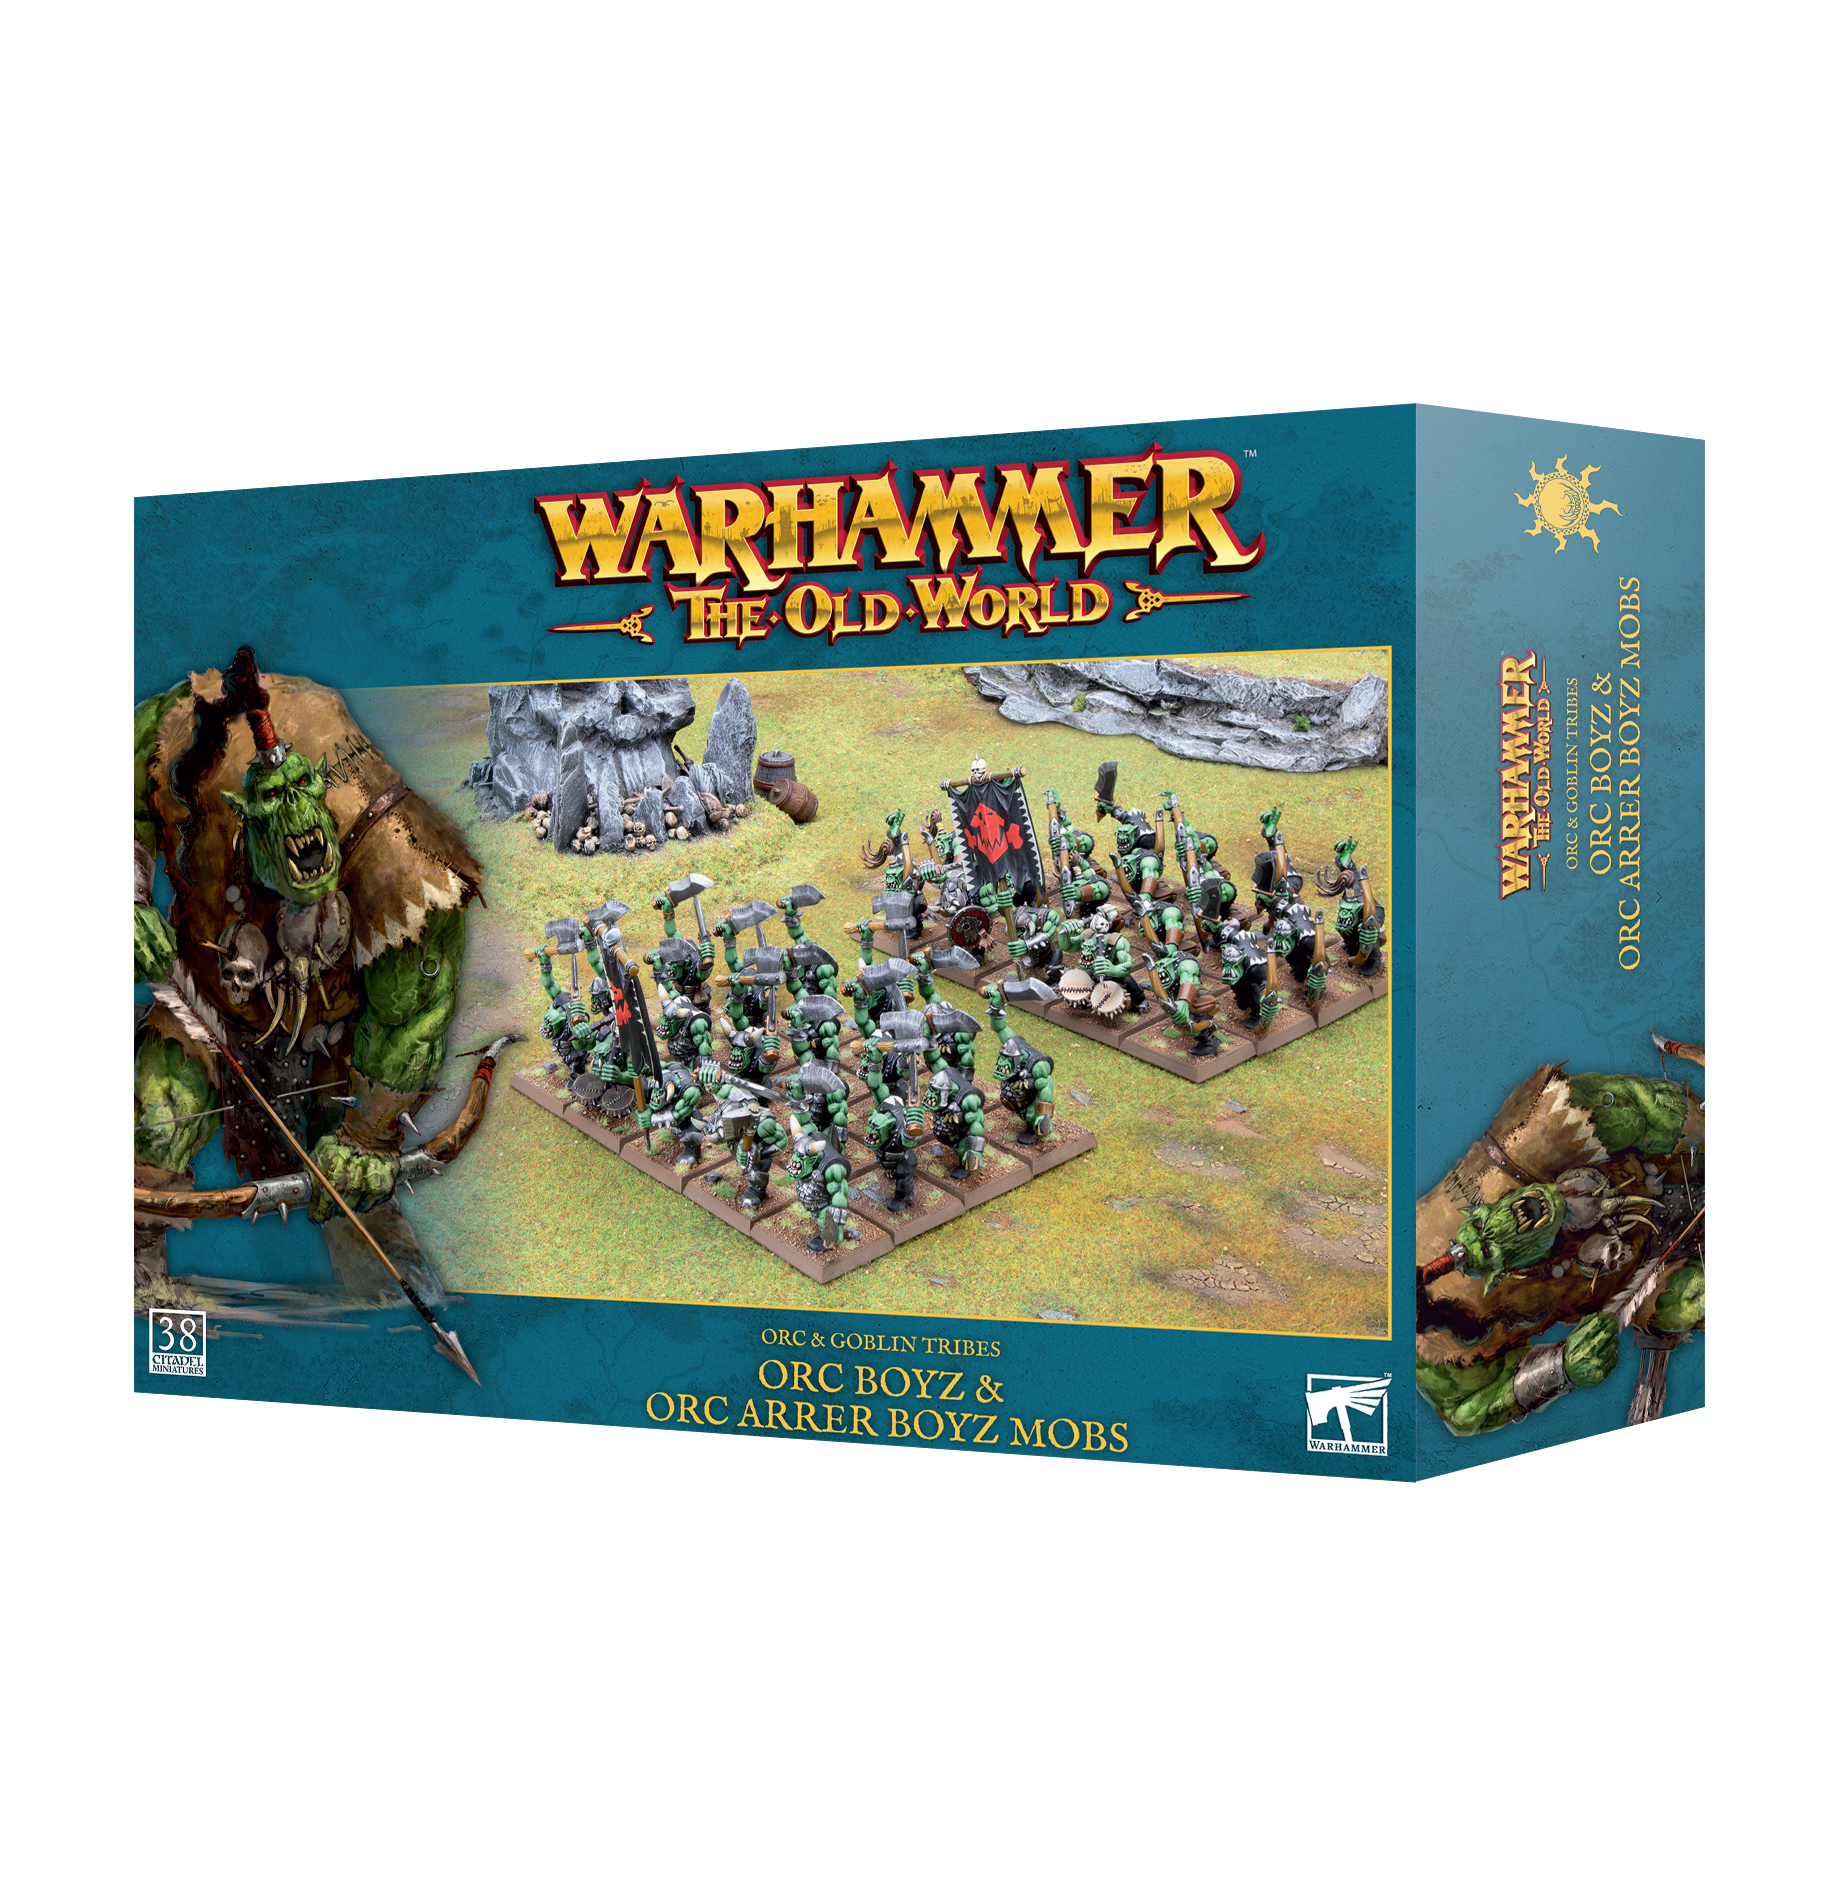 Warhammer: The Old World: Orc & Goblin Tribes: Orc Boyz and Orc Arrer Boyz Mobs 